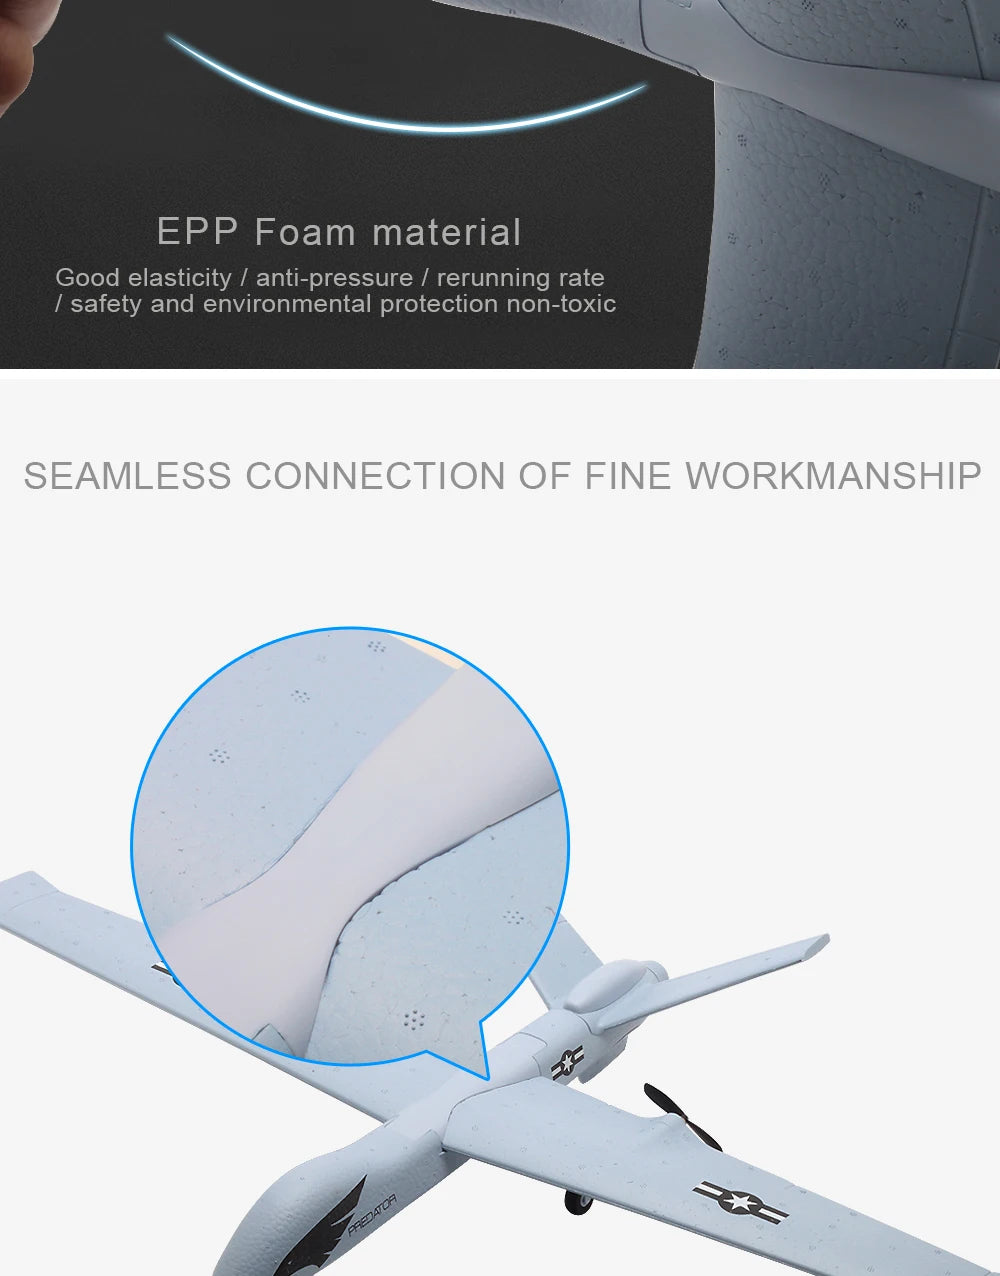 EPP Foam material Good elasticity anti-pressure rerunning rate safety and environmental protection